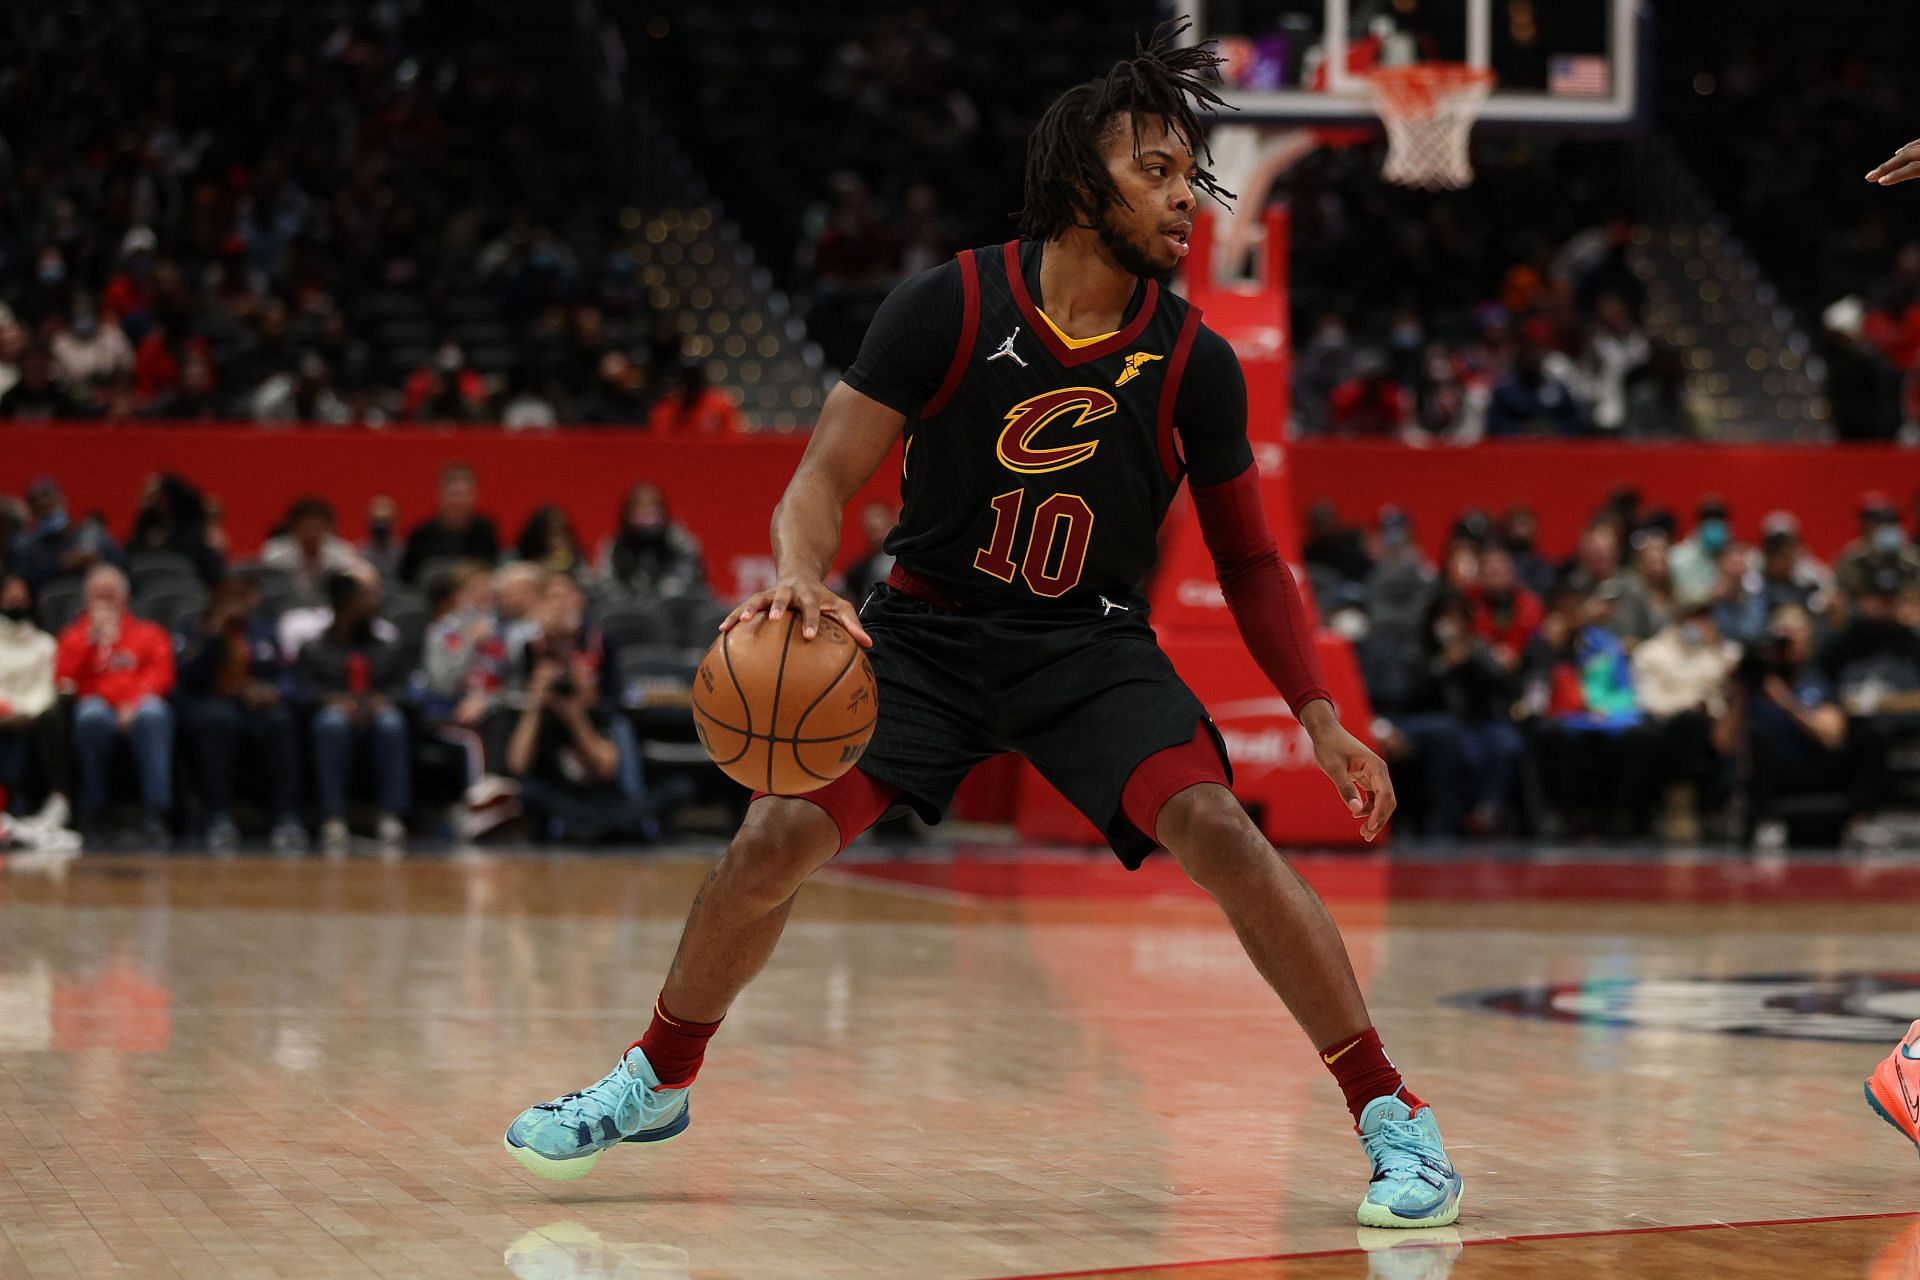 Darius Garland #10 of the Cleveland Cavaliers in action against the Washington Wizards